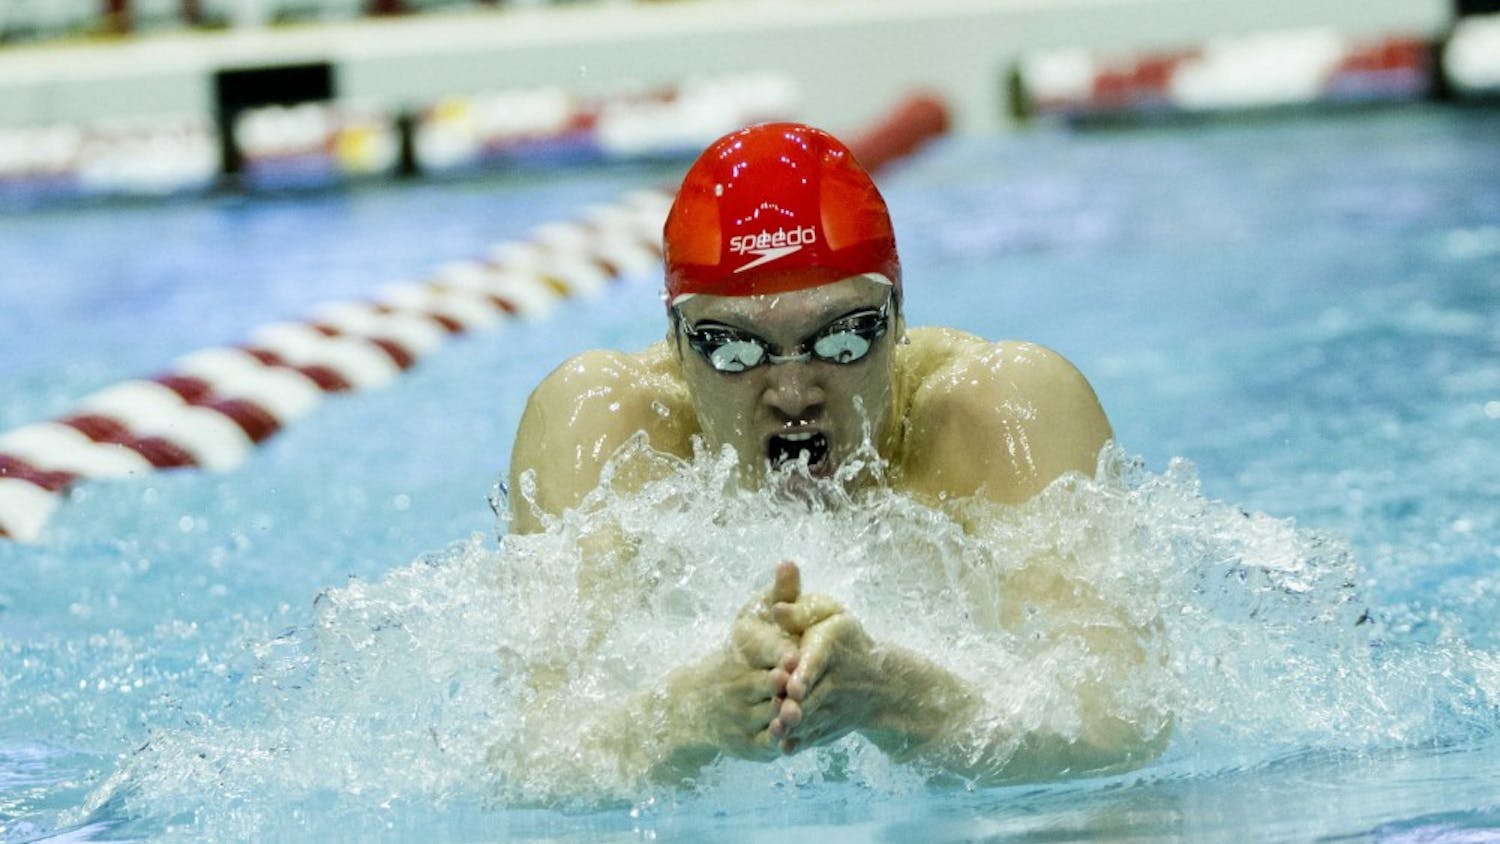 Big Ten Men's Swimming and Diving Championships: Day 3 and 4